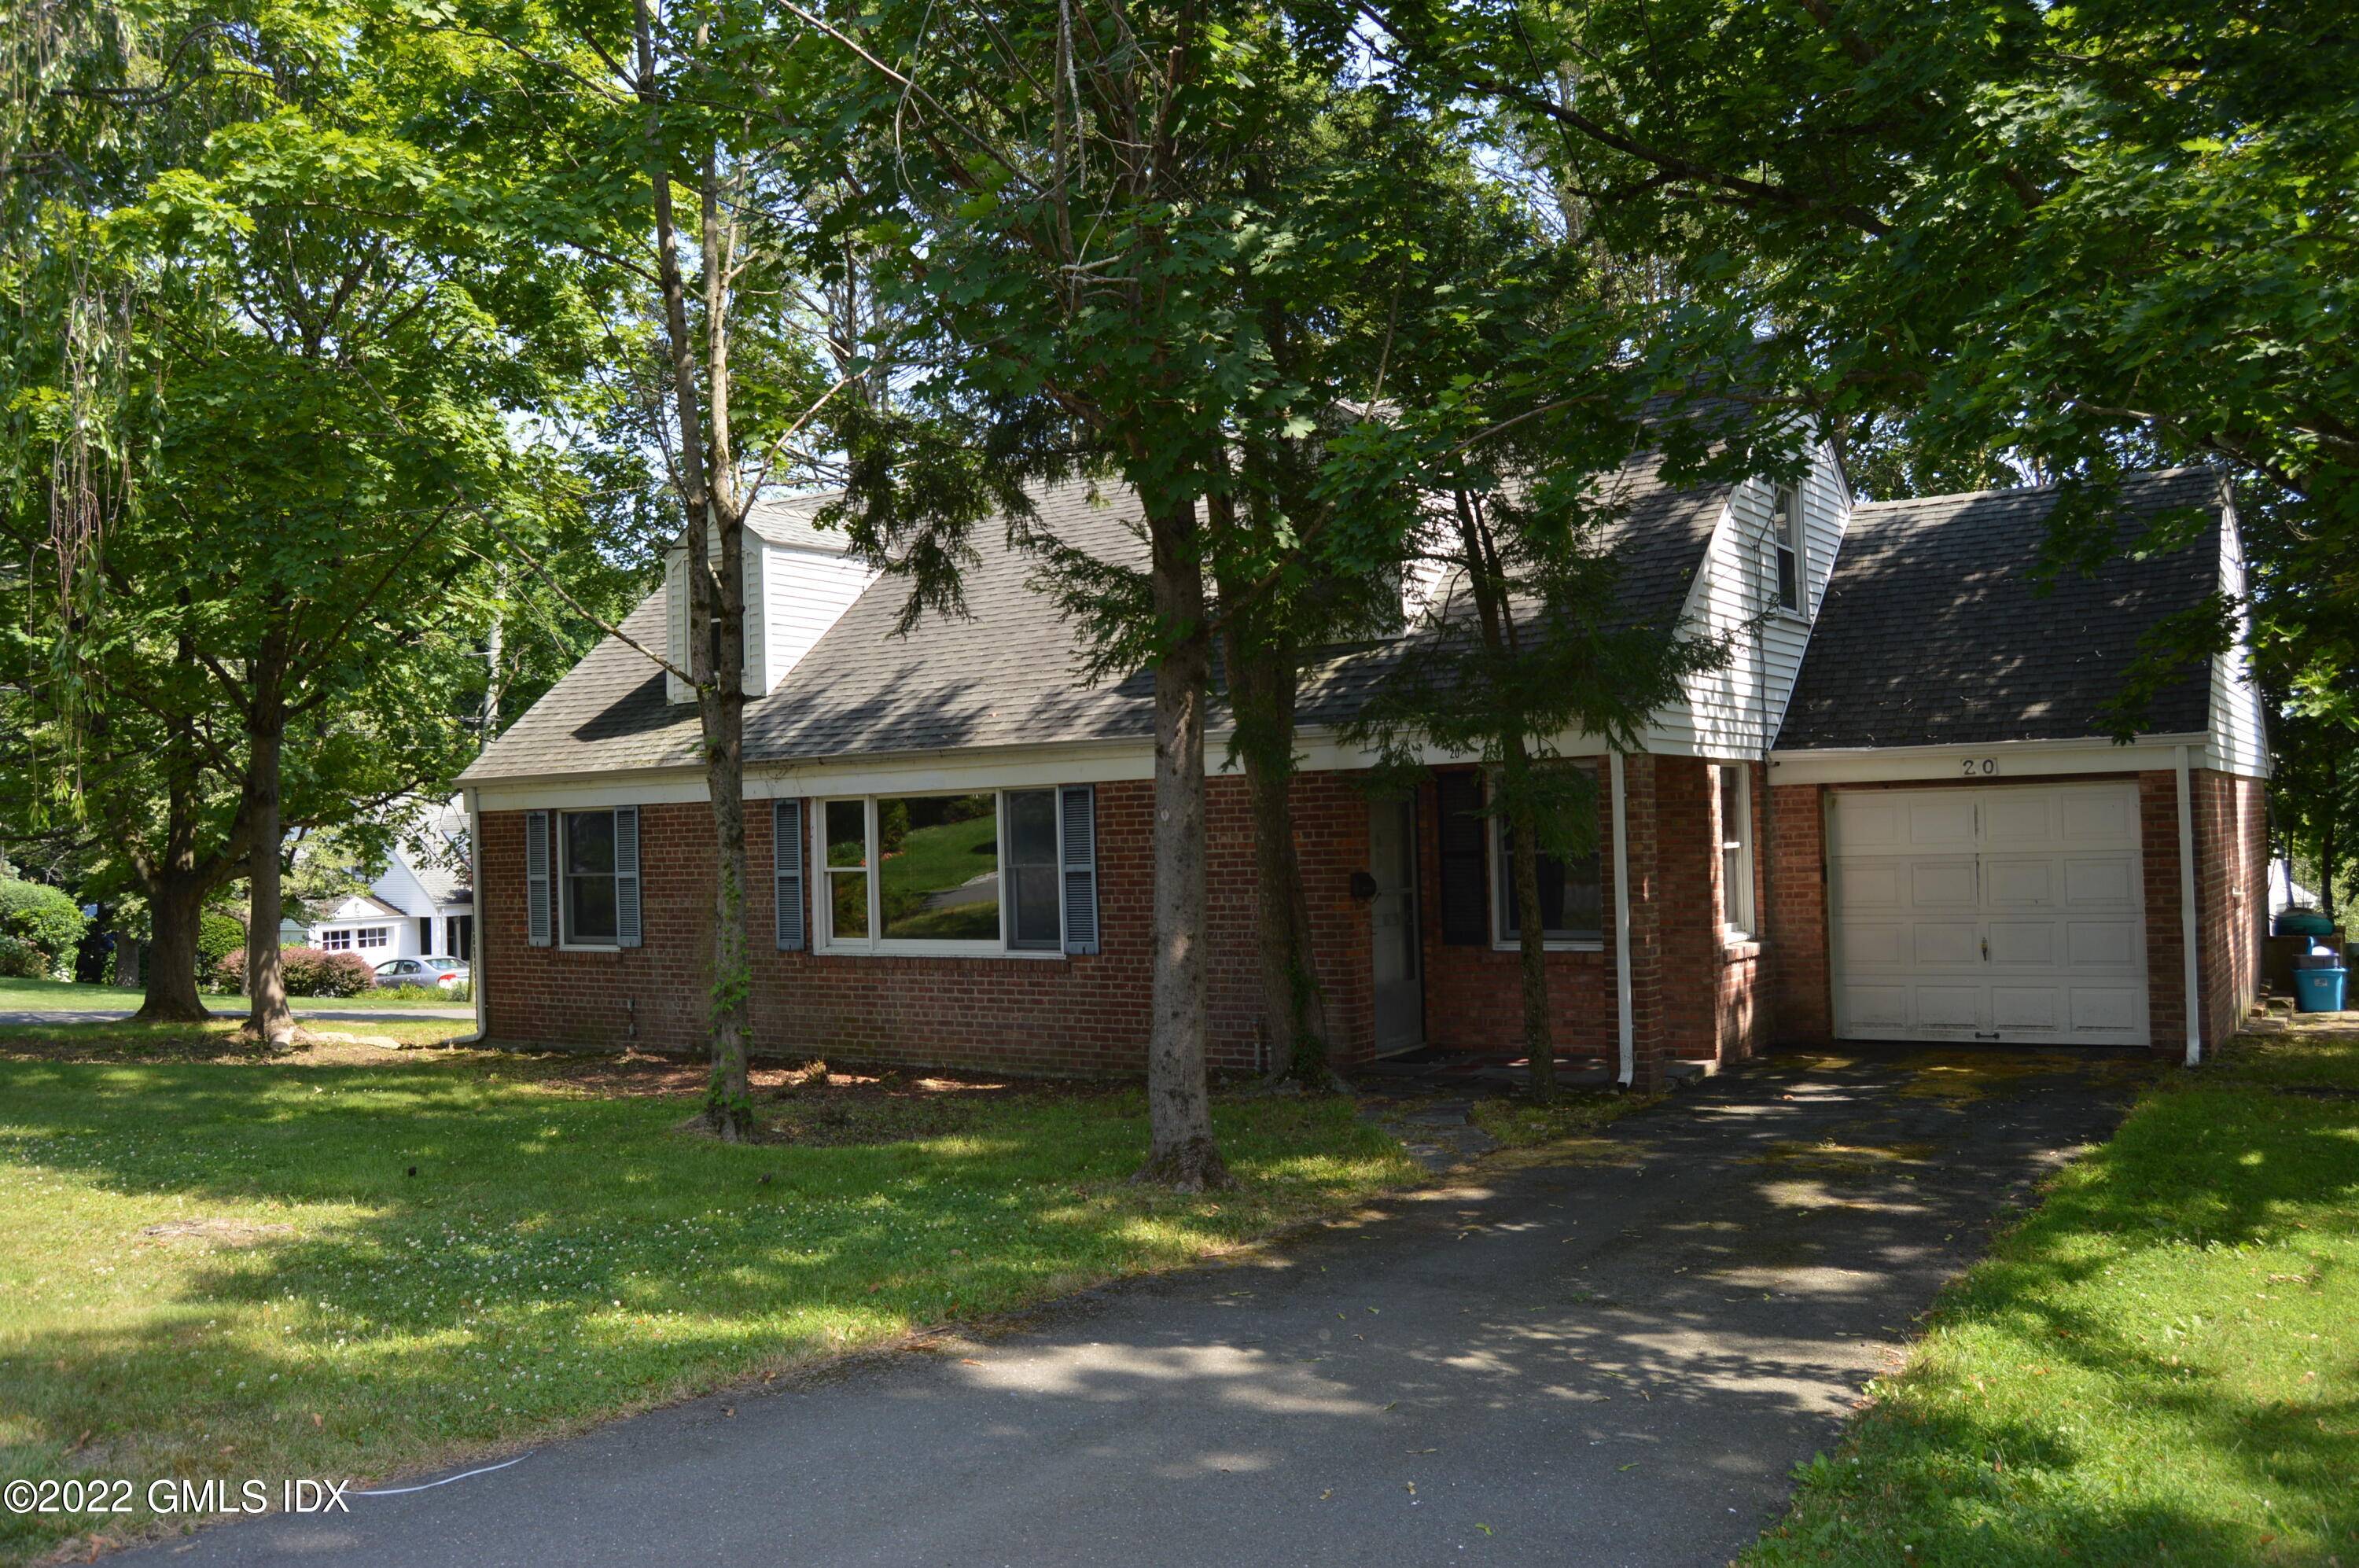 Lots of opportunity in this brick cape cod house, it's your choice to renovate, add on or start from scratch.